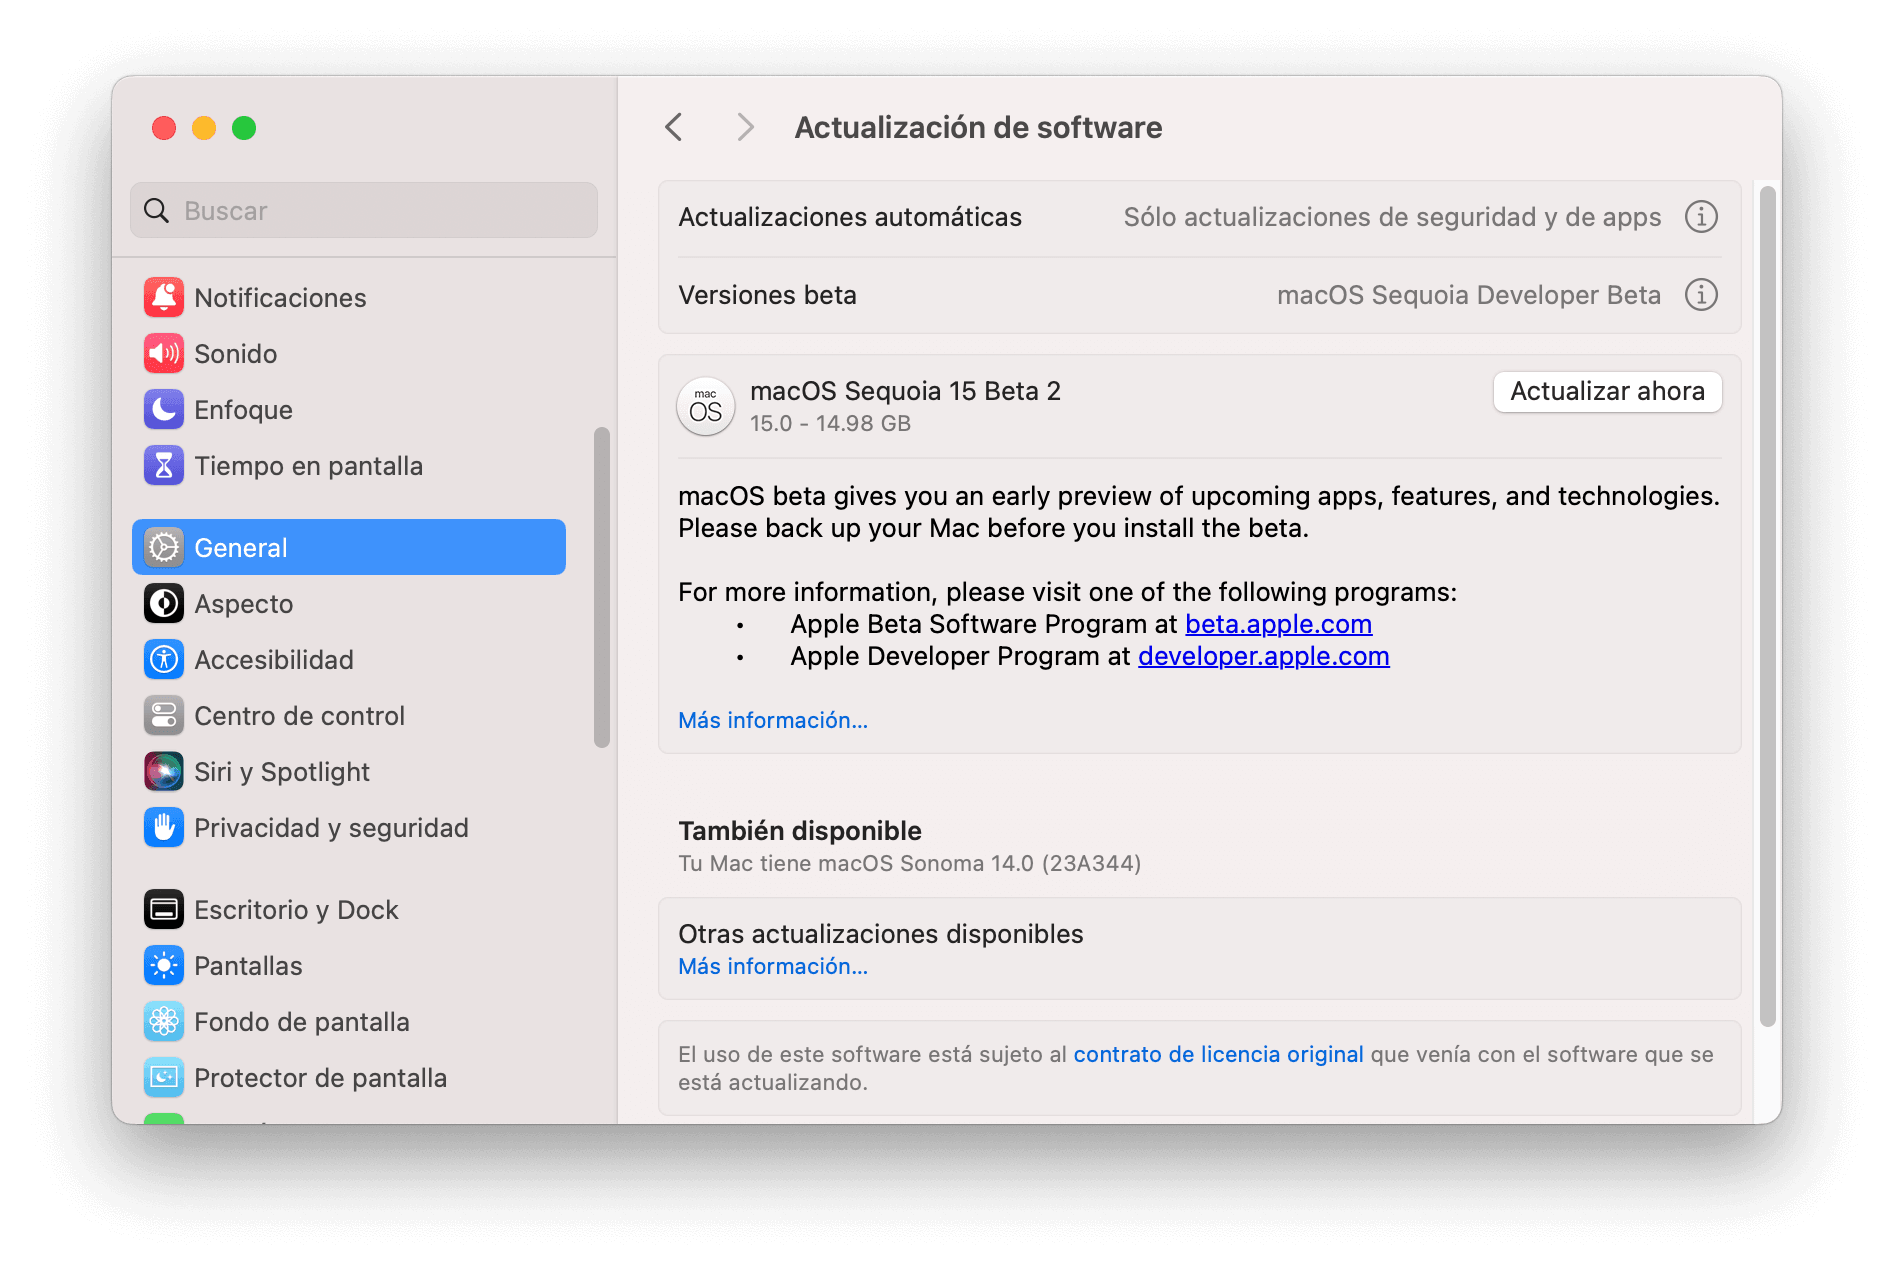 download-and-install-macos-sequoia-beta-es.png